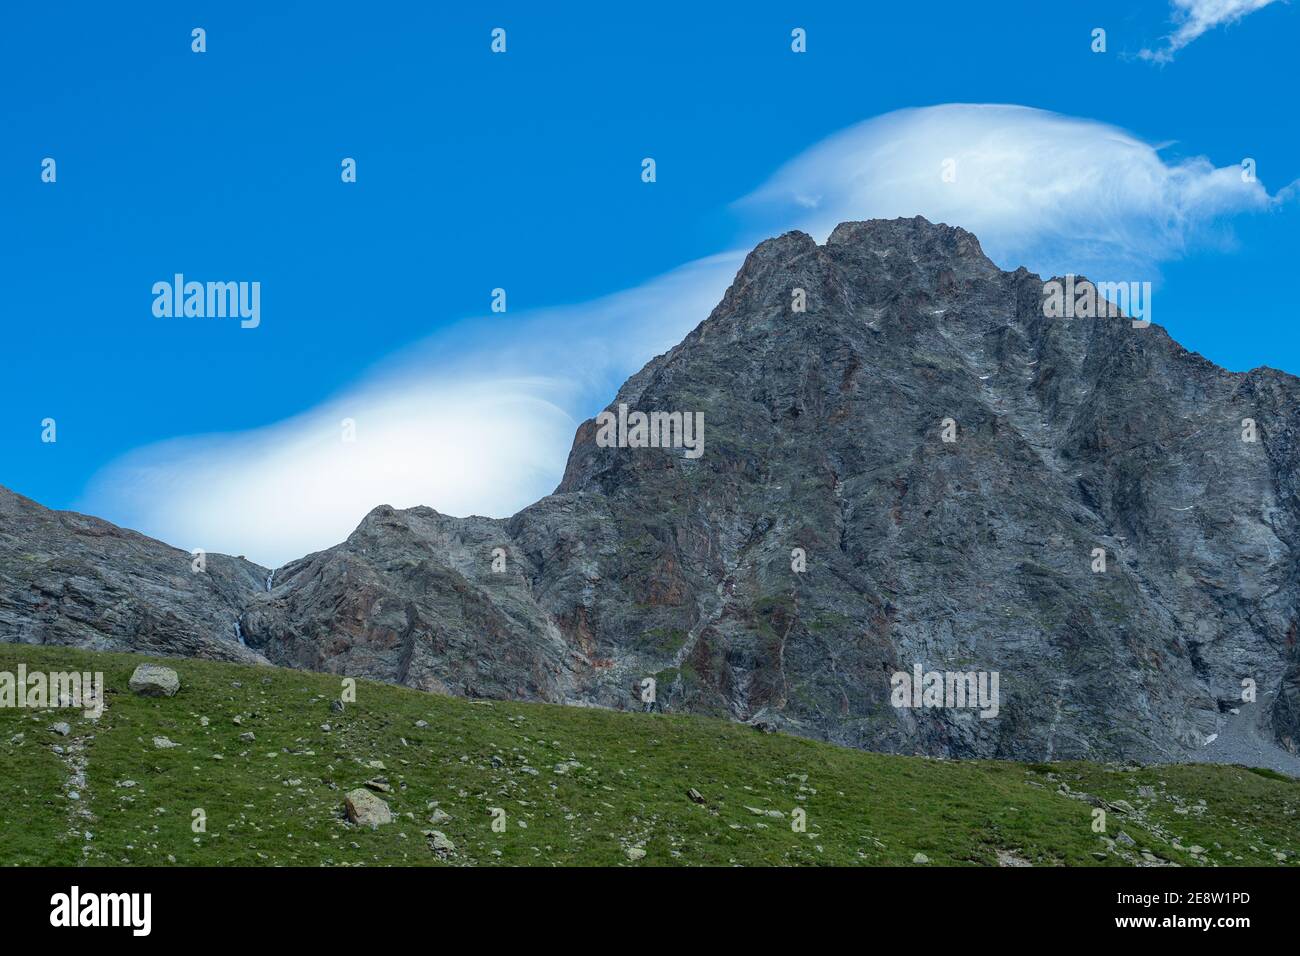 Typical clouds surrounding a peak during föhn, a stormy wind in Switzerland Stock Photo